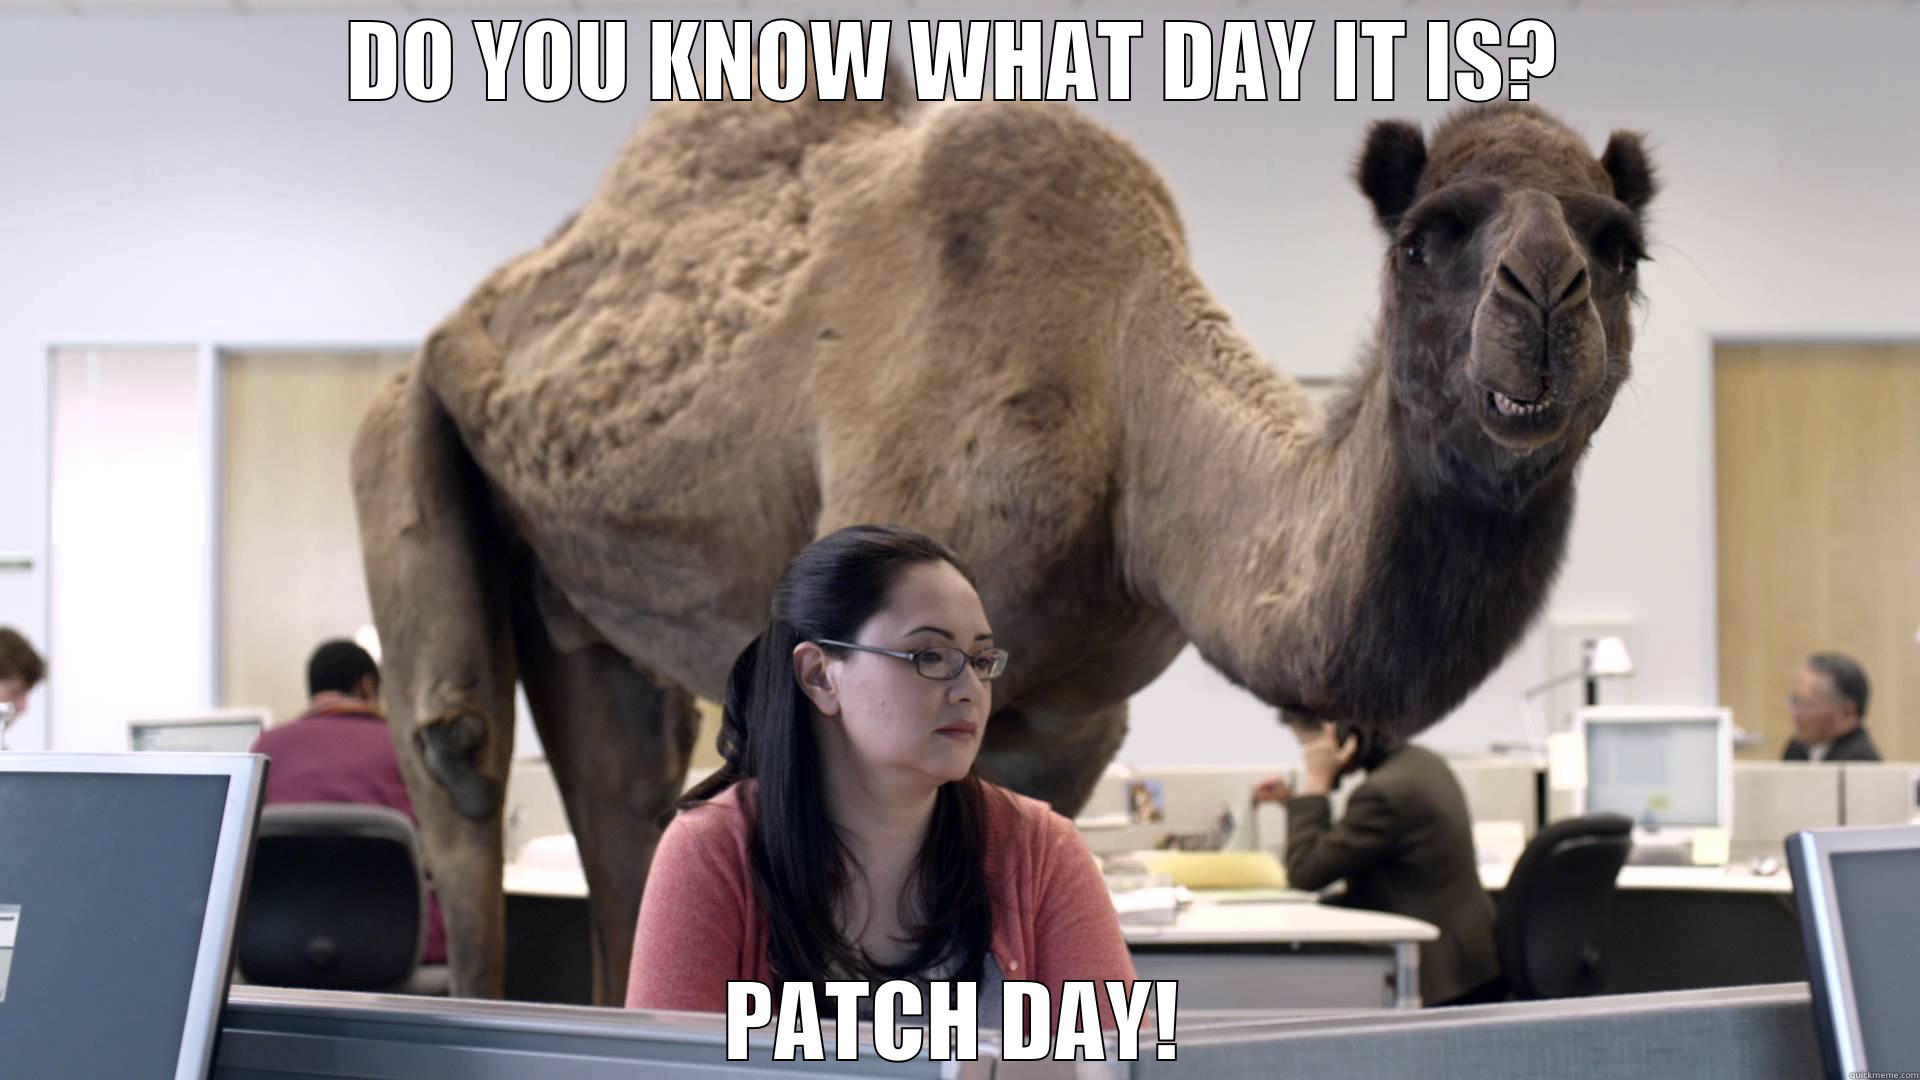 Patch Day! - DO YOU KNOW WHAT DAY IT IS? PATCH DAY! Misc